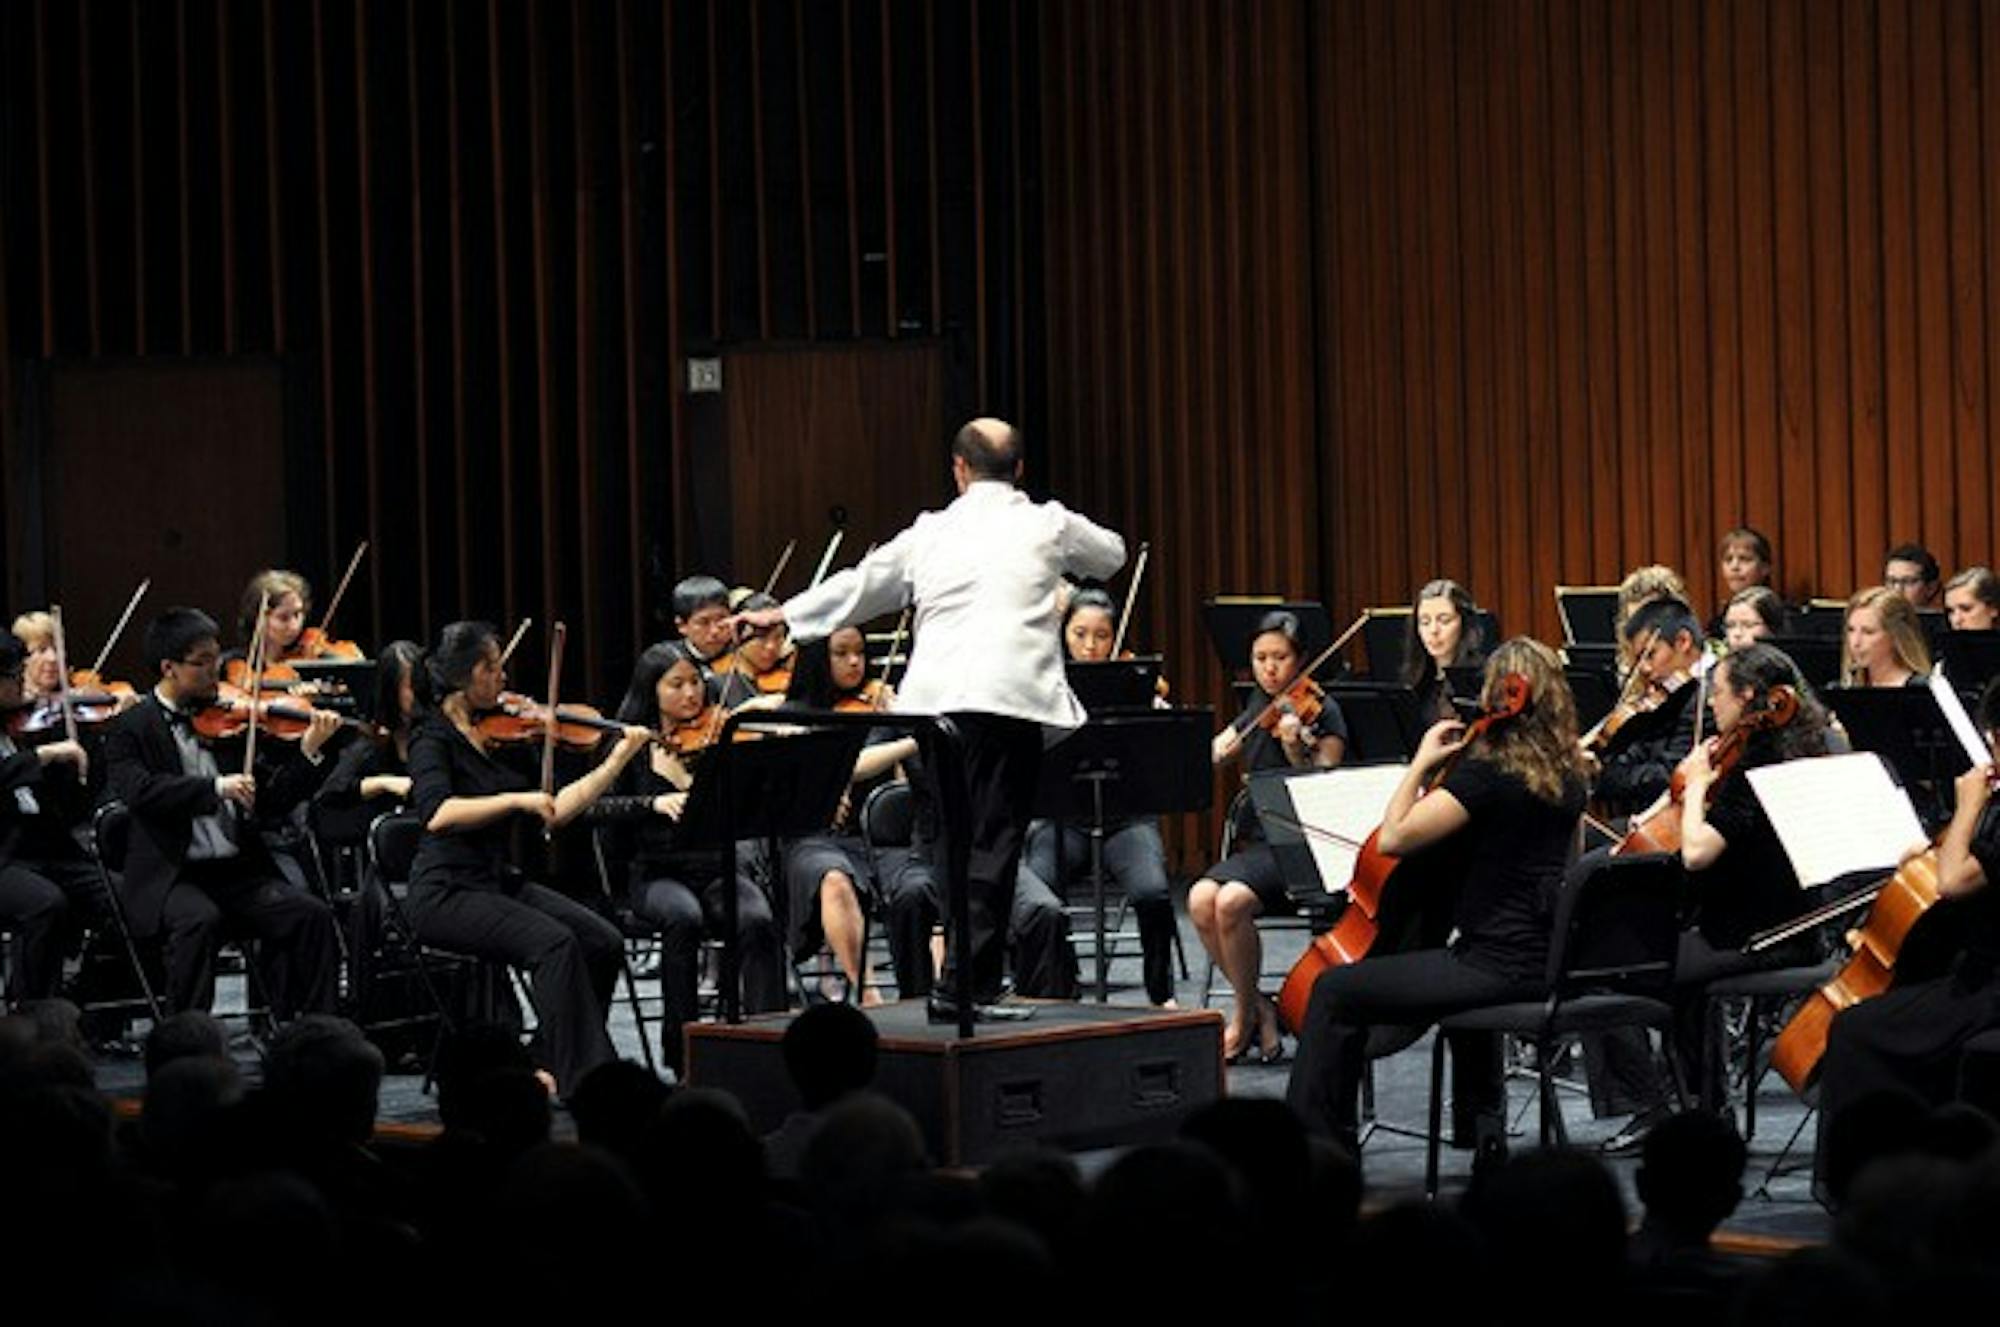 The Dartmouth Symphony Orchestra will perform a free concert on Sunday as part of the Year of the Arts initiative at the College, showcasing senior soloists.